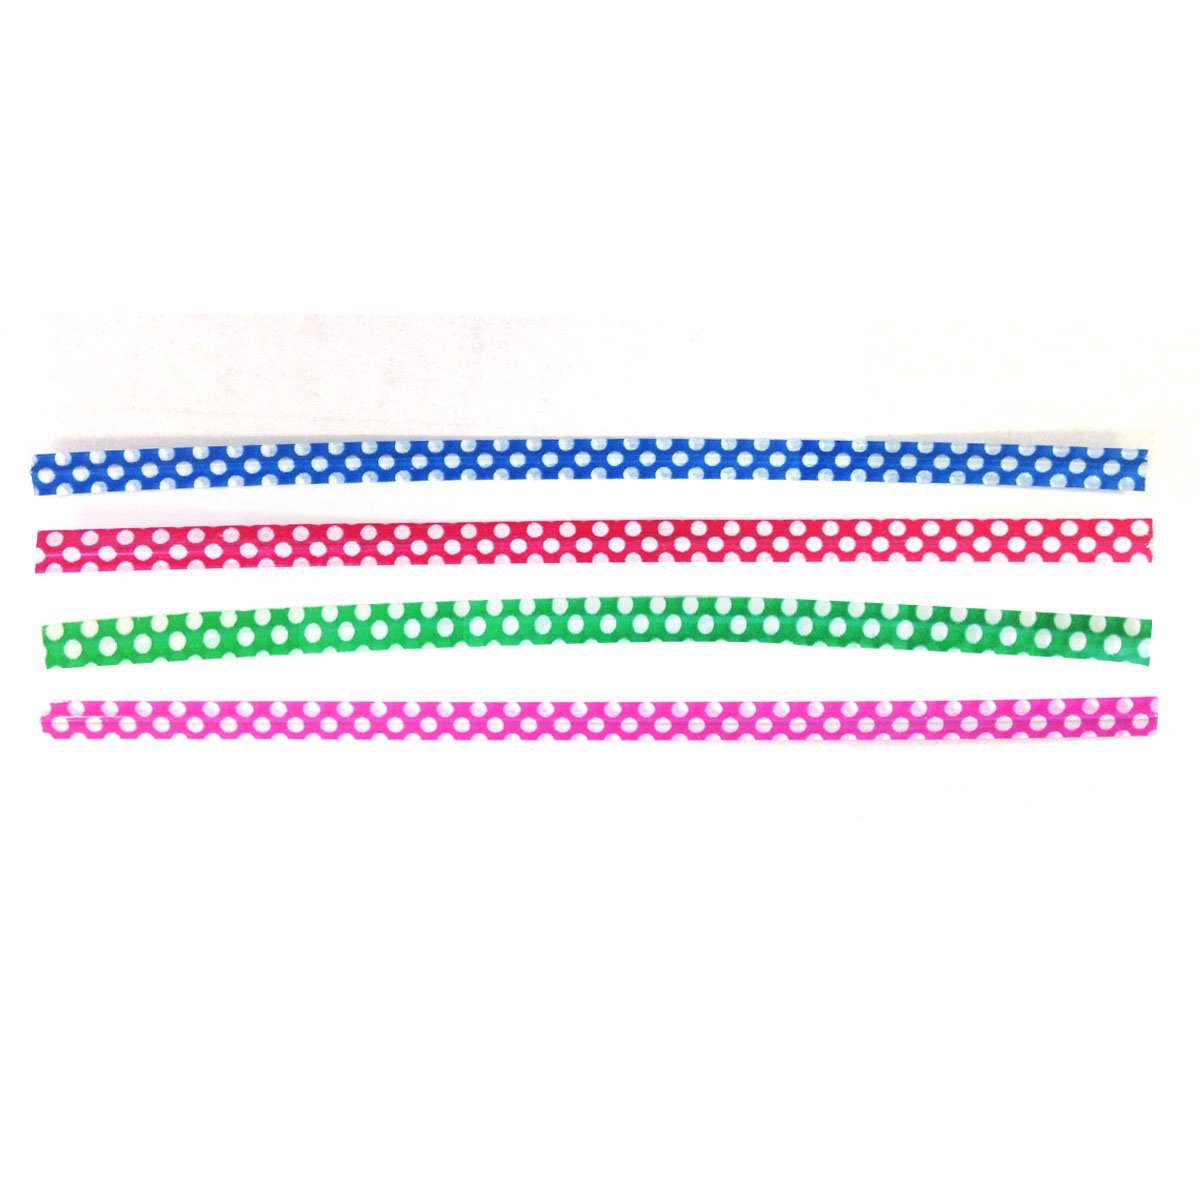 Wrapables 200pcs 4" Polka Dot Twist Ties with 20 Scalloped Gift Tags